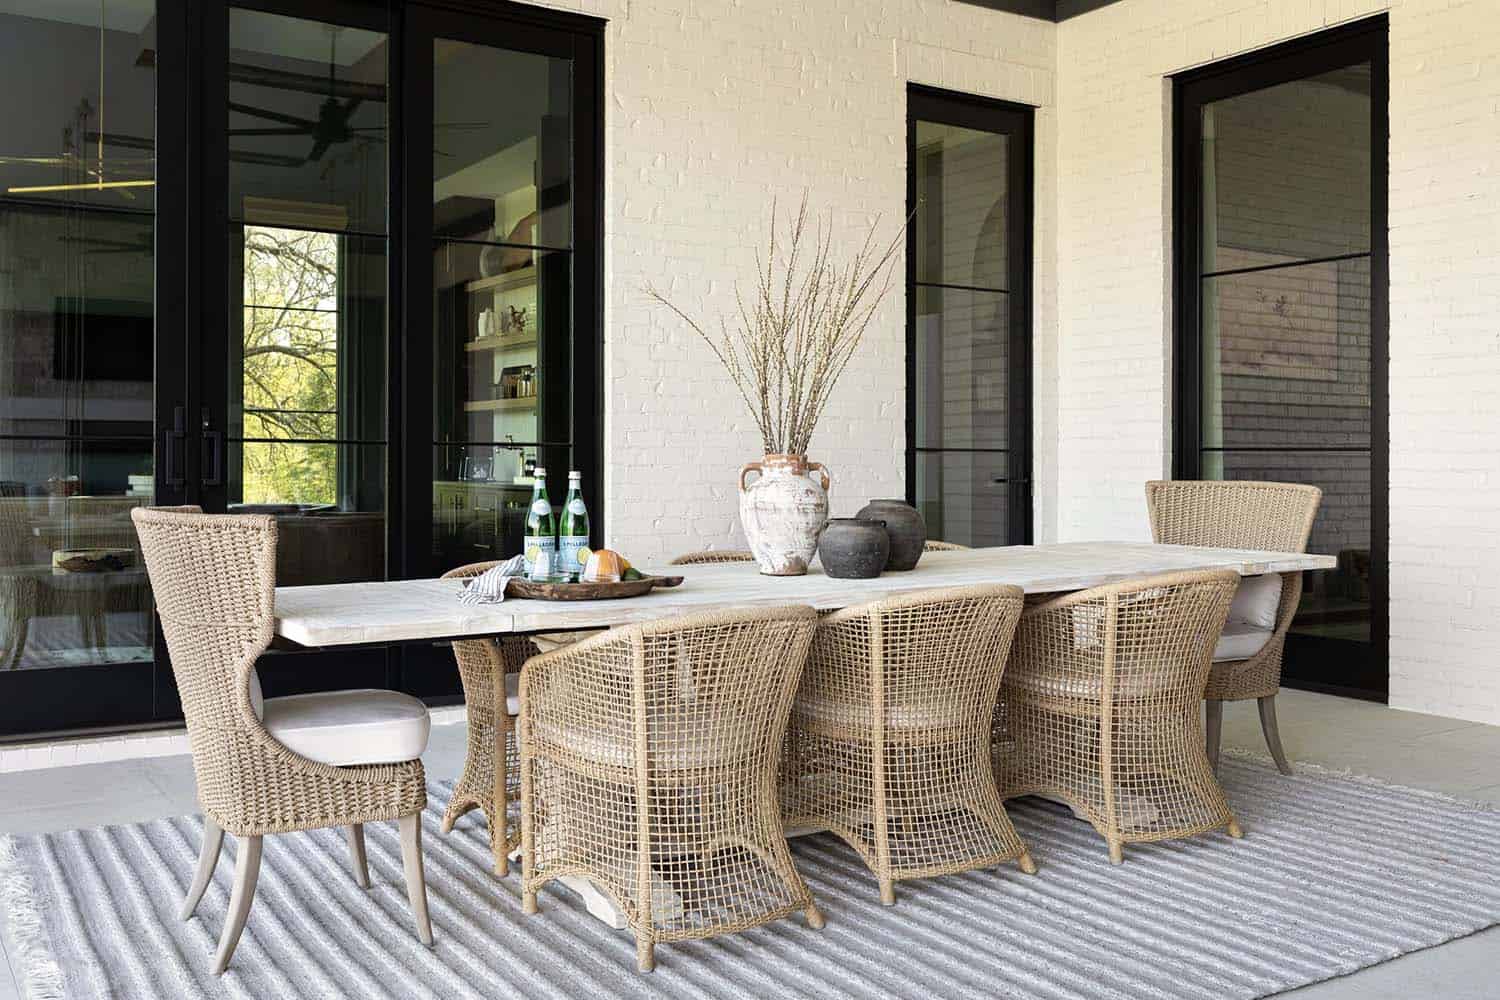 transitional style covered porch outdoor dining table